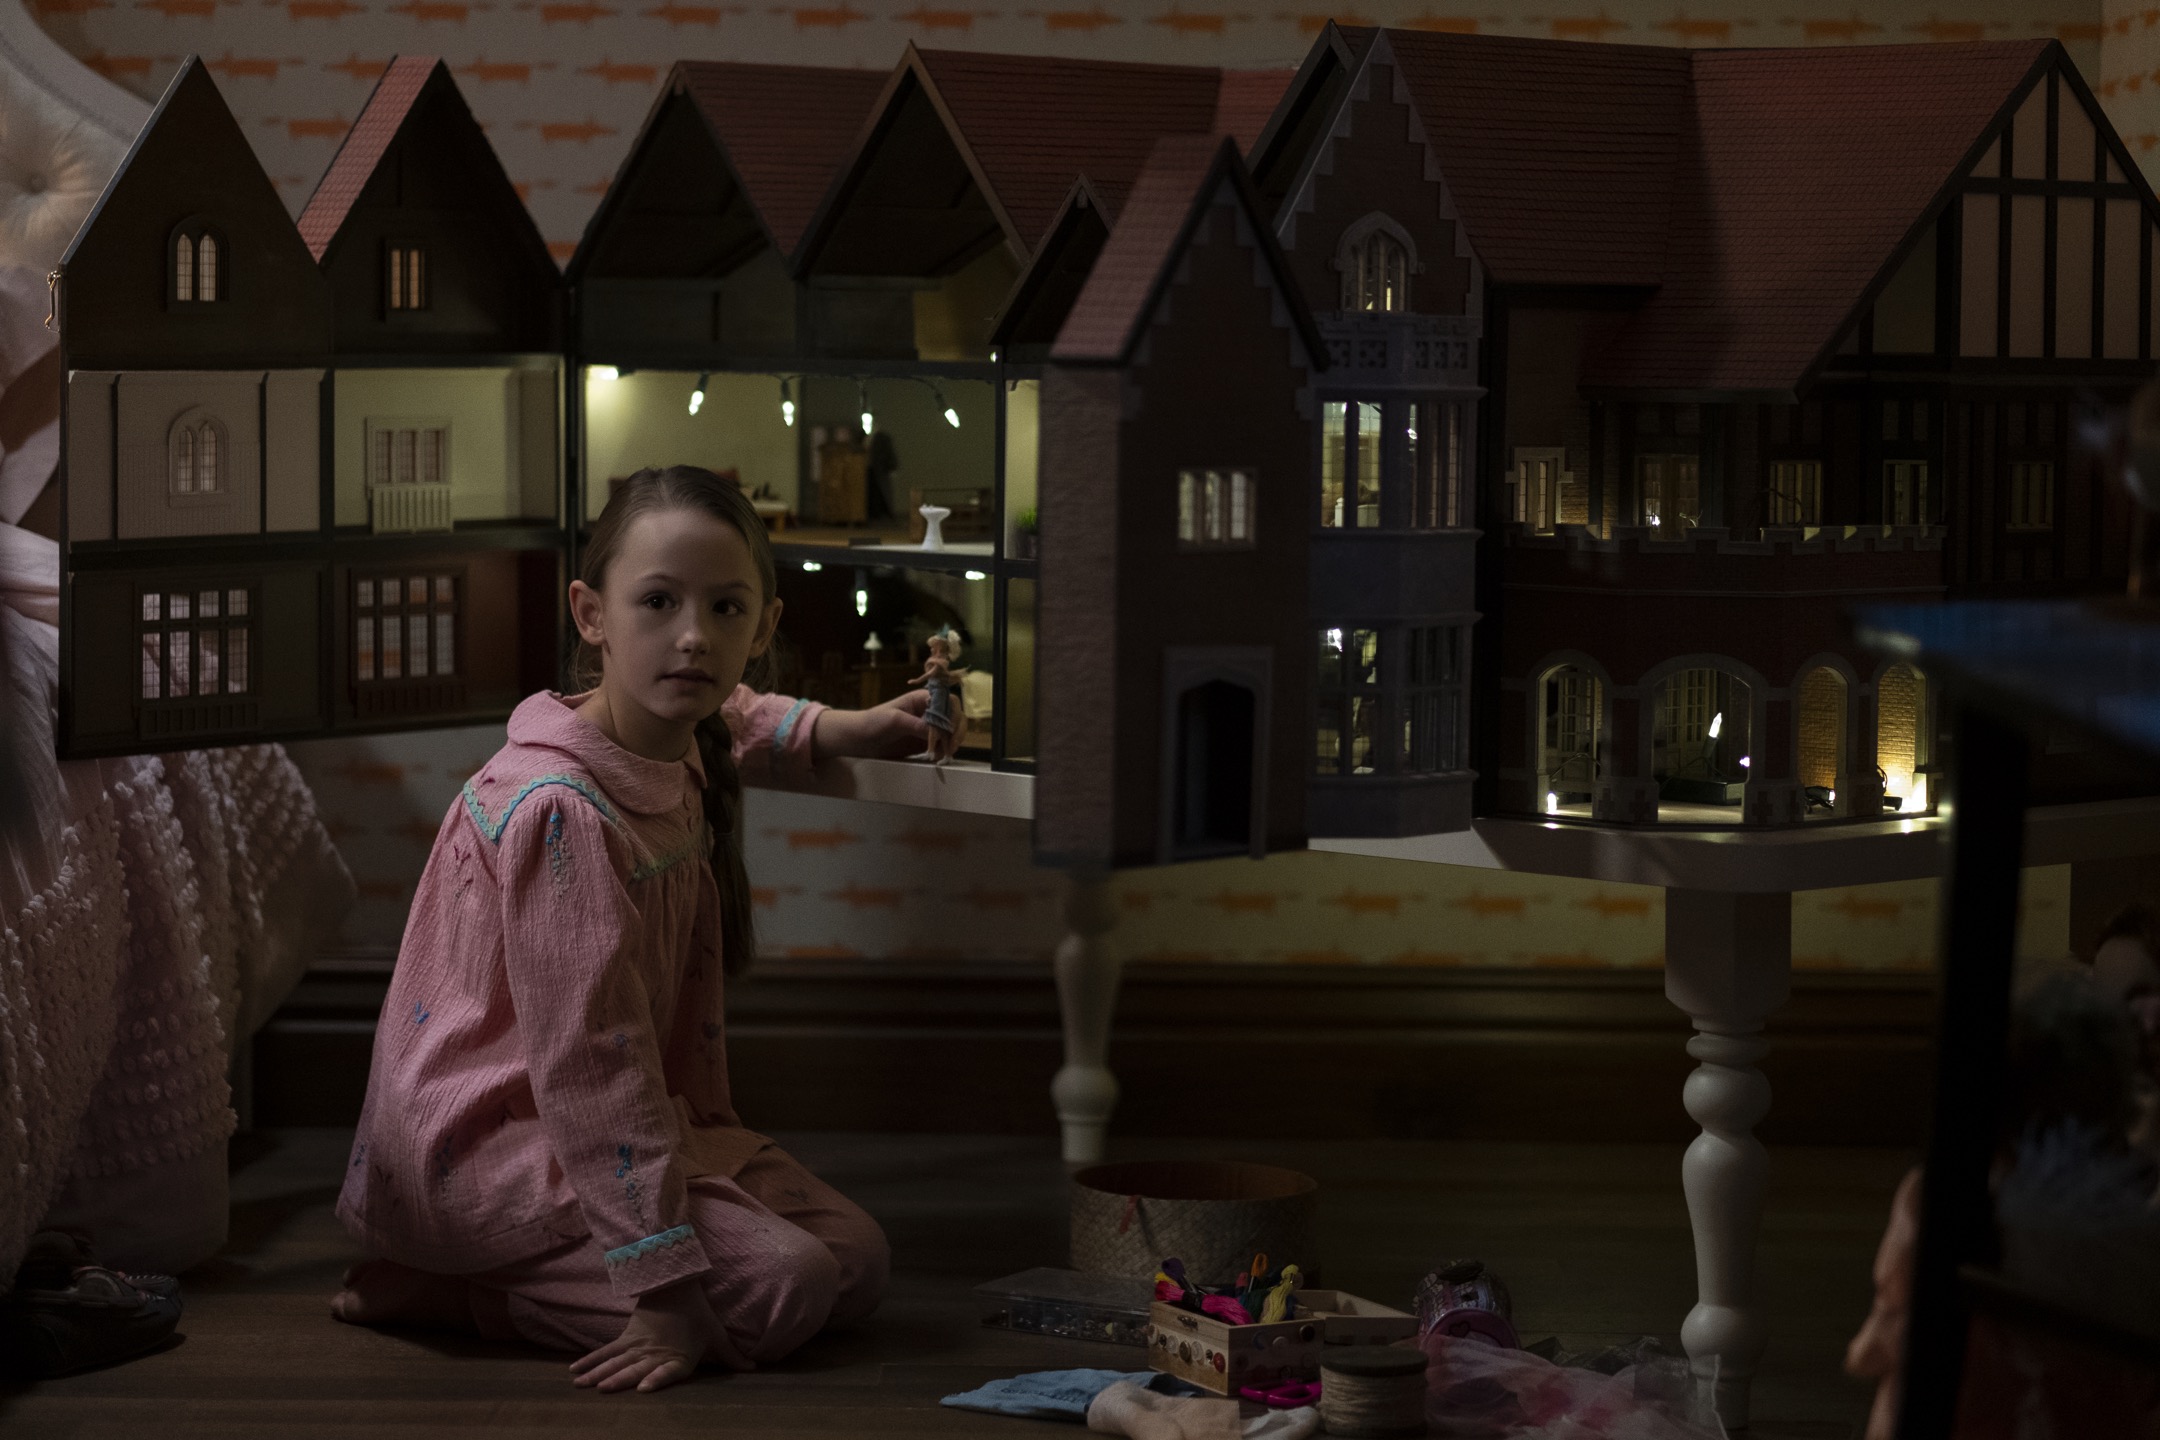 THE HAUNTING OF BLY MANOR (L to R) AMELIE SMITH as FLORA in episode 101 of THE HAUNTING OF BLY MANOR Cr. EIKE SCHROTER/NETFLIX © 2020